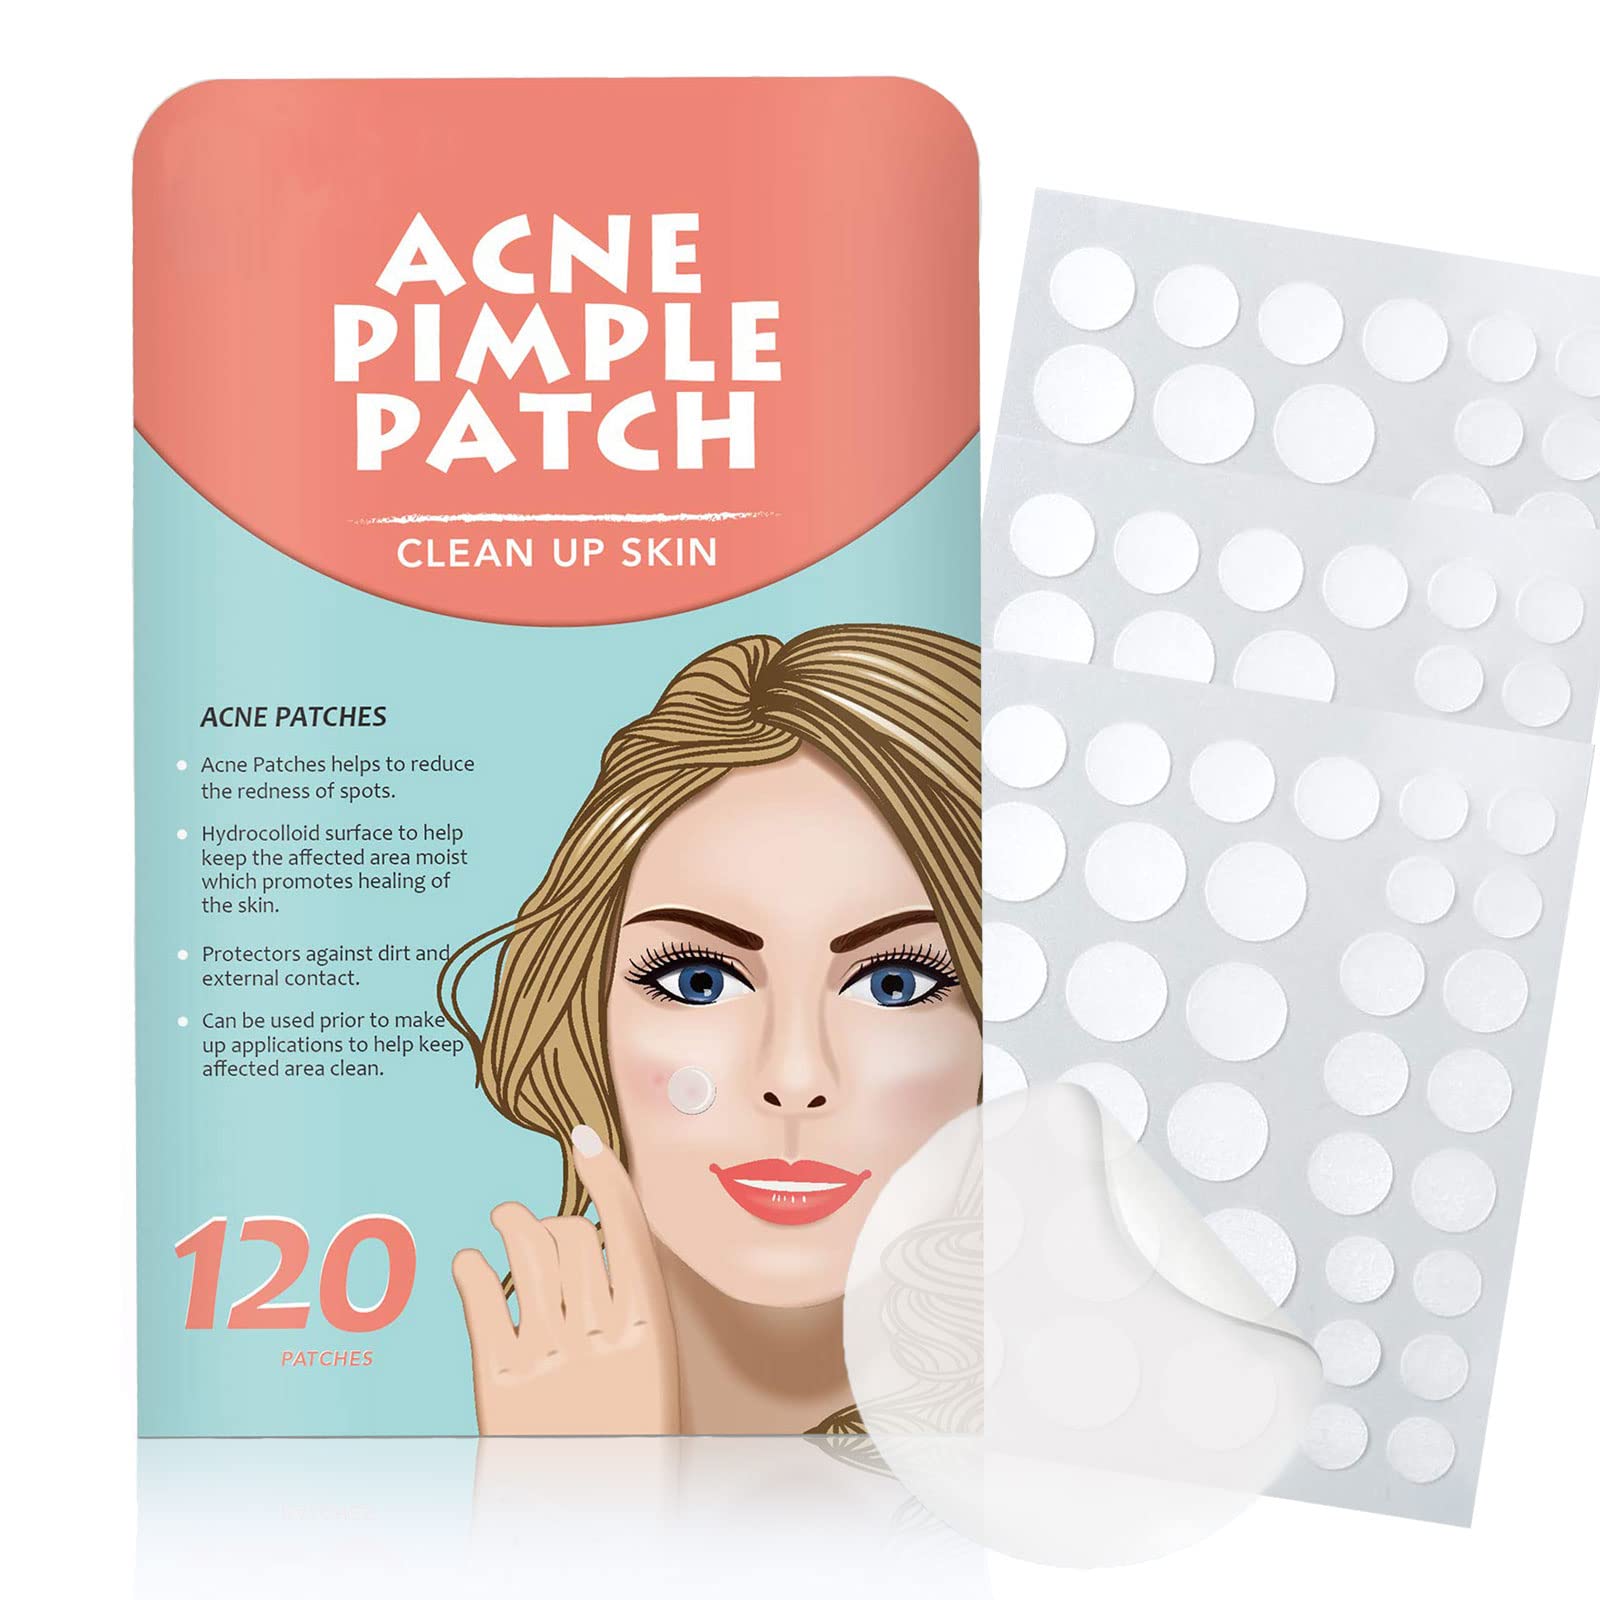 Mighty Patch Review: 'They Quickly Cleared My Acne Overnight